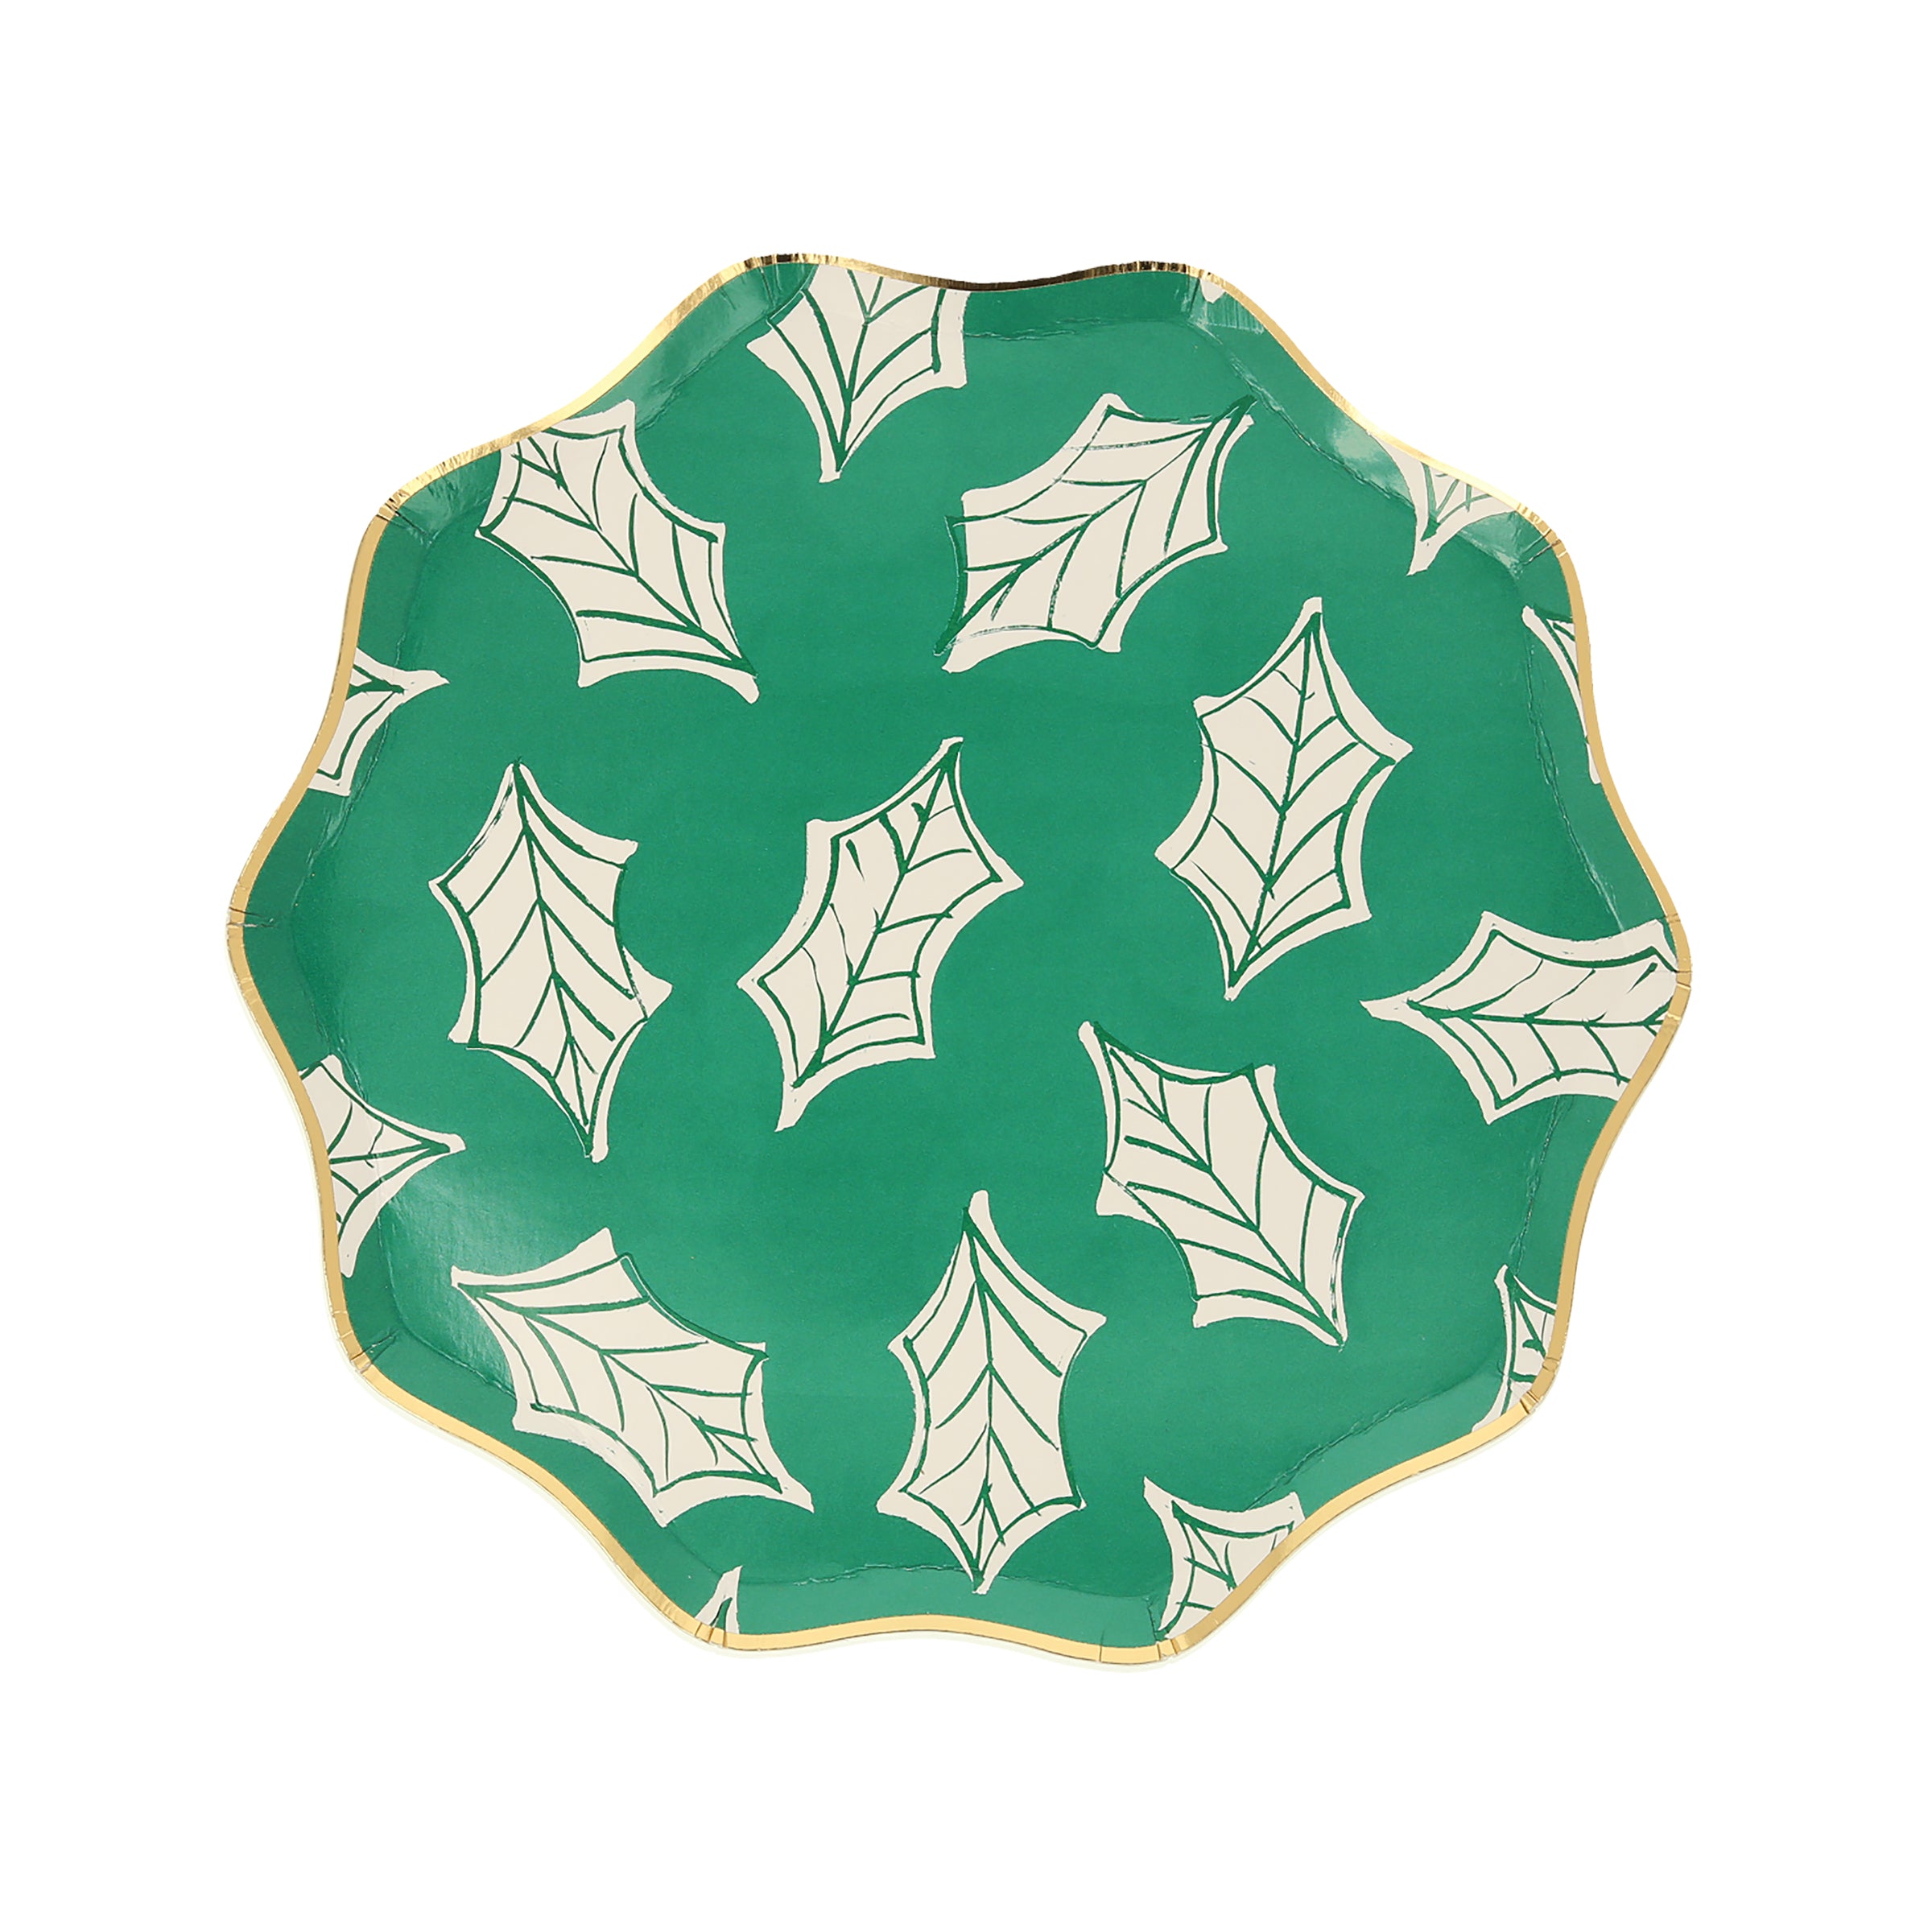 Our party plates, with their vintage plate design, are perfect to add to your Christmas party supplies.